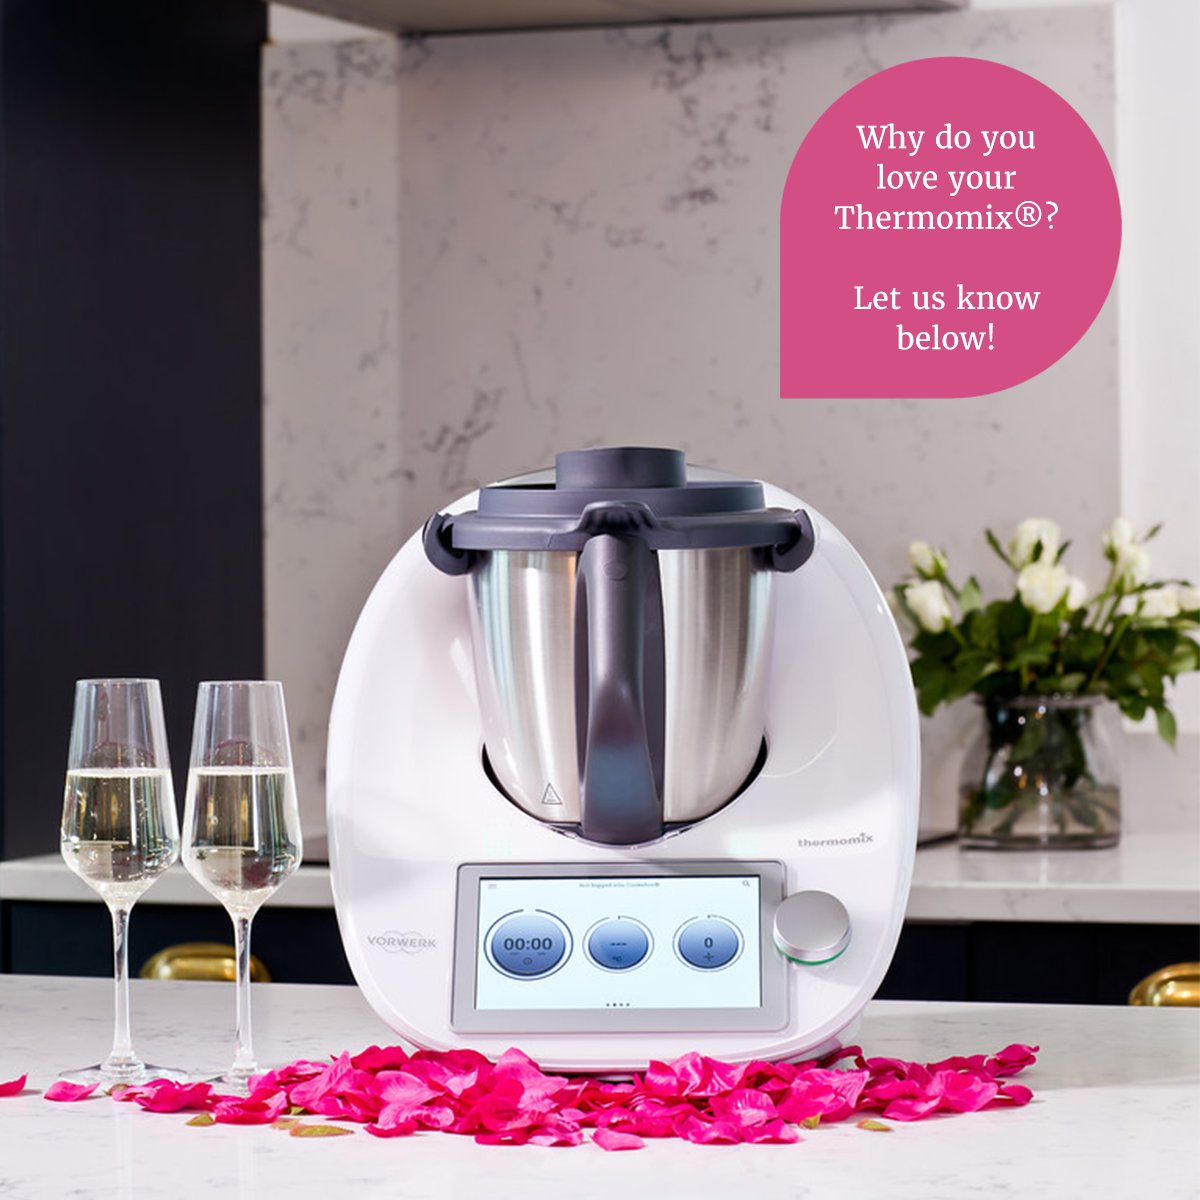 Show your Thermomix some love! It's the month of love and there are about a million reasons to love Thermomix. From the various modes and recipes to the fact that it cleans itself, we simply couldn't narrow it down. Let us know why you love your Thermomix in the comments below 👇